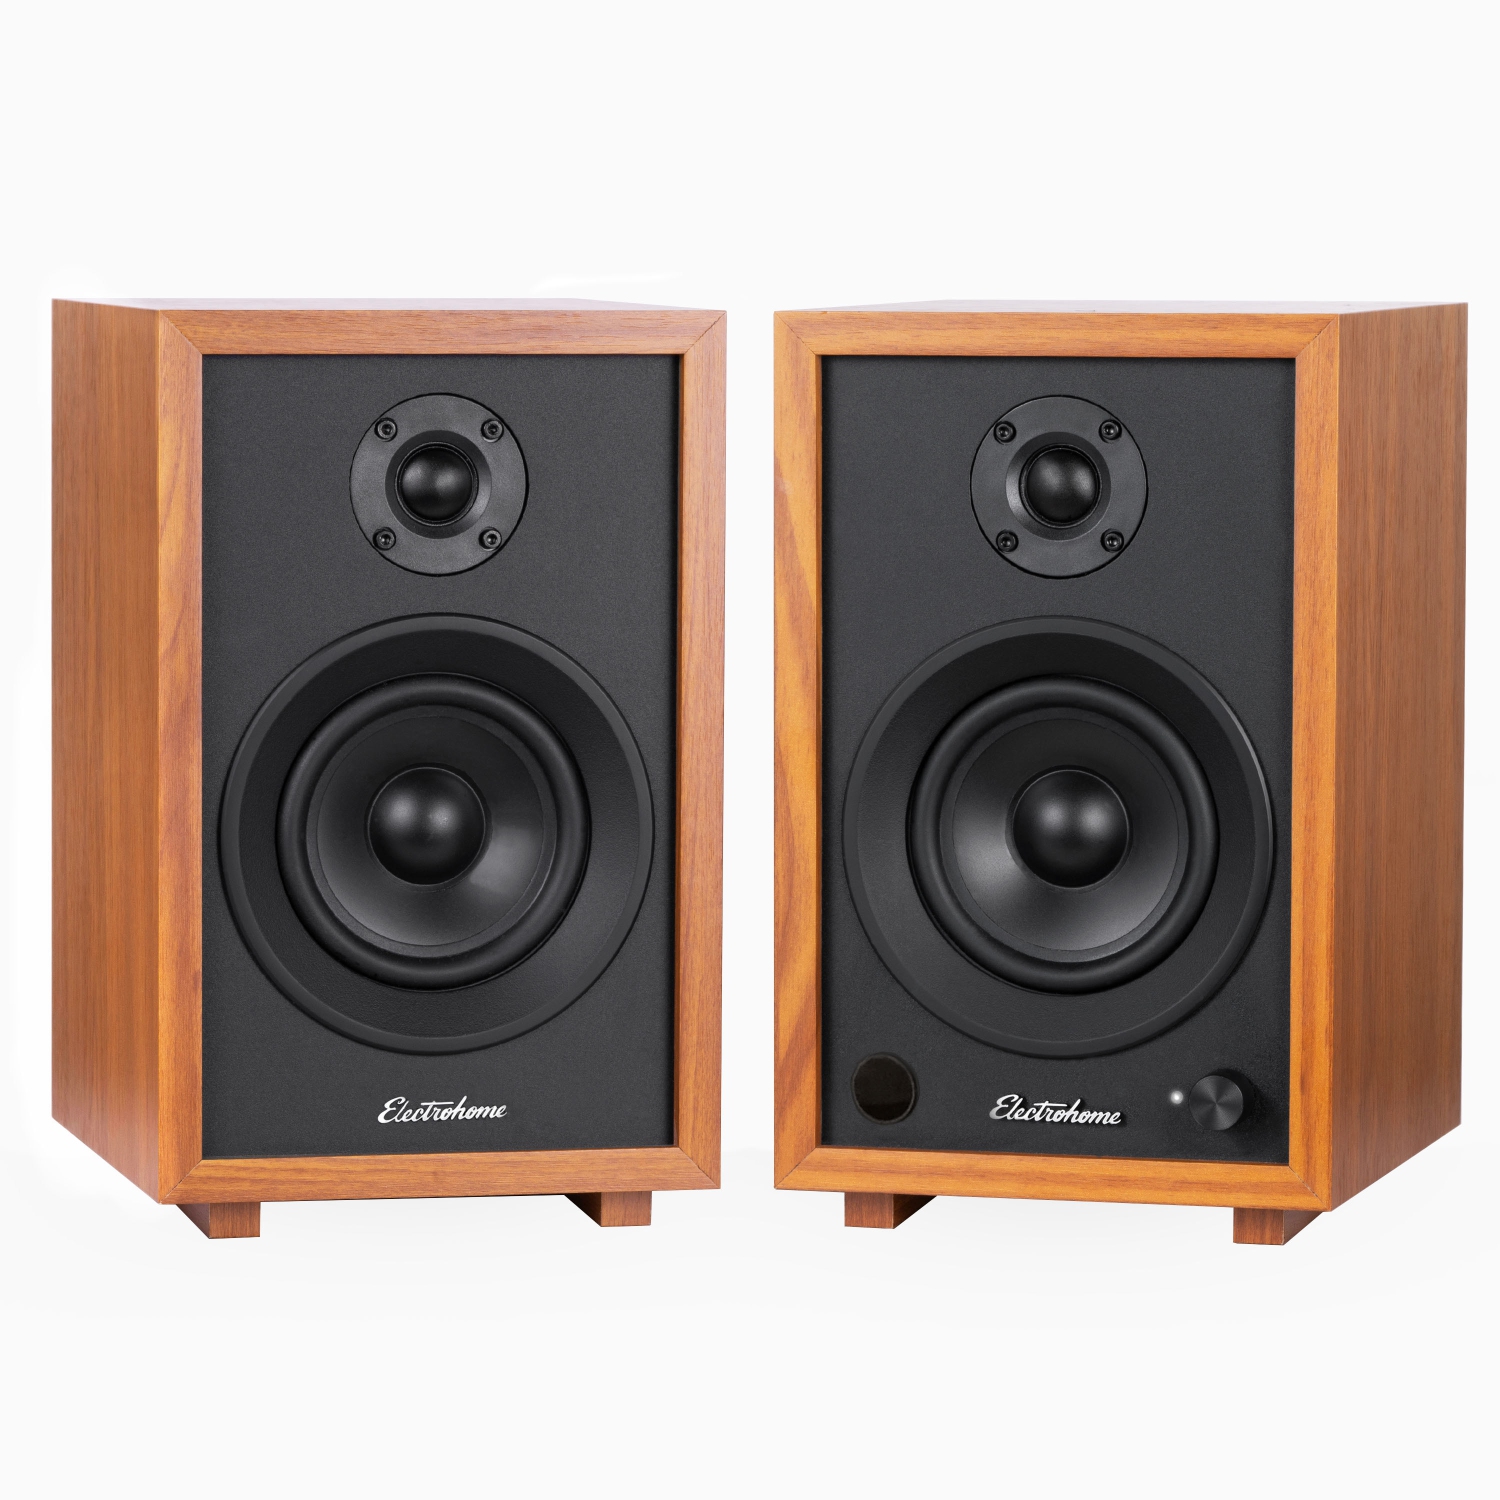 Electrohome McKinley 2.0 Stereo Powered Bookshelf Speakers with Built-in Amplifier, 4" Drivers, Bluetooth 5, RCA/Aux